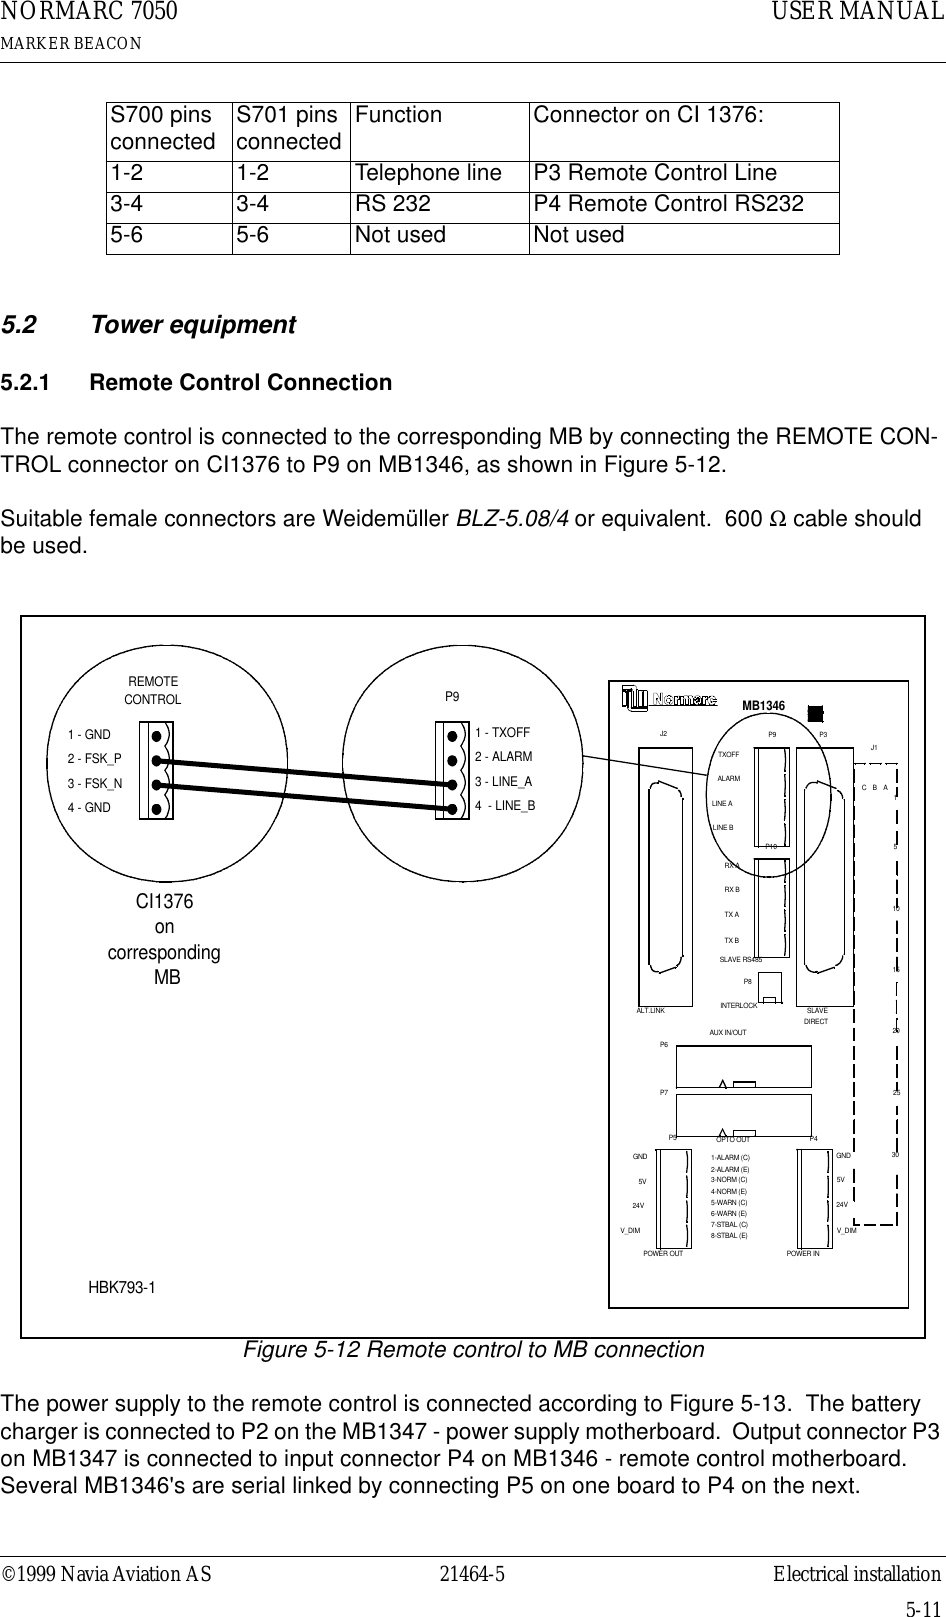 ©1999 Navia Aviation AS 21464-5 Electrical installationUSER MANUALNORMARC 7050MARKER BEACON5-115.2 Tower equipment5.2.1 Remote Control ConnectionThe remote control is connected to the corresponding MB by connecting the REMOTE CON-TROL connector on CI1376 to P9 on MB1346, as shown in Figure 5-12.Suitable female connectors are Weidemüller BLZ-5.08/4 or equivalent.  600 Ω cable should be used.Figure 5-12 Remote control to MB connectionThe power supply to the remote control is connected according to Figure 5-13.  The battery charger is connected to P2 on the MB1347 - power supply motherboard.  Output connector P3 on MB1347 is connected to input connector P4 on MB1346 - remote control motherboard.  Several MB1346&apos;s are serial linked by connecting P5 on one board to P4 on the next.S700 pins connected S701 pins connected Function Connector on CI 1376:1-2 1-2 Telephone line P3 Remote Control Line3-4 3-4 RS 232 P4 Remote Control RS2325-6 5-6 Not used Not usedREMOTECONTROL1 - GND2 - FSK_P3 - FSK_N4 - GNDJ2 P3P6P7P4P5P9P10P8OPTO OUT2-ALARM (E)1-ALARM (C)4-NORM (E)5-WARN (C)6-WARN (E)7-STBAL (C)8-STBAL (E)3-NORM (C)GND5V24VV_DIMGND5V24VV_DIMPOWER OUT POWER INAUX IN/OUTSLAVEDIRECTINTERLOCKTXOFFALARMLINE ALINE BRX ARX BTX ATX BSLAVE RS485J1ABC153020251510ALT.LINKMB1346P91 - TXOFF2 - ALARM3 - LINE_A4  - LINE_BCI1376 on corresponding MBHBK793-1